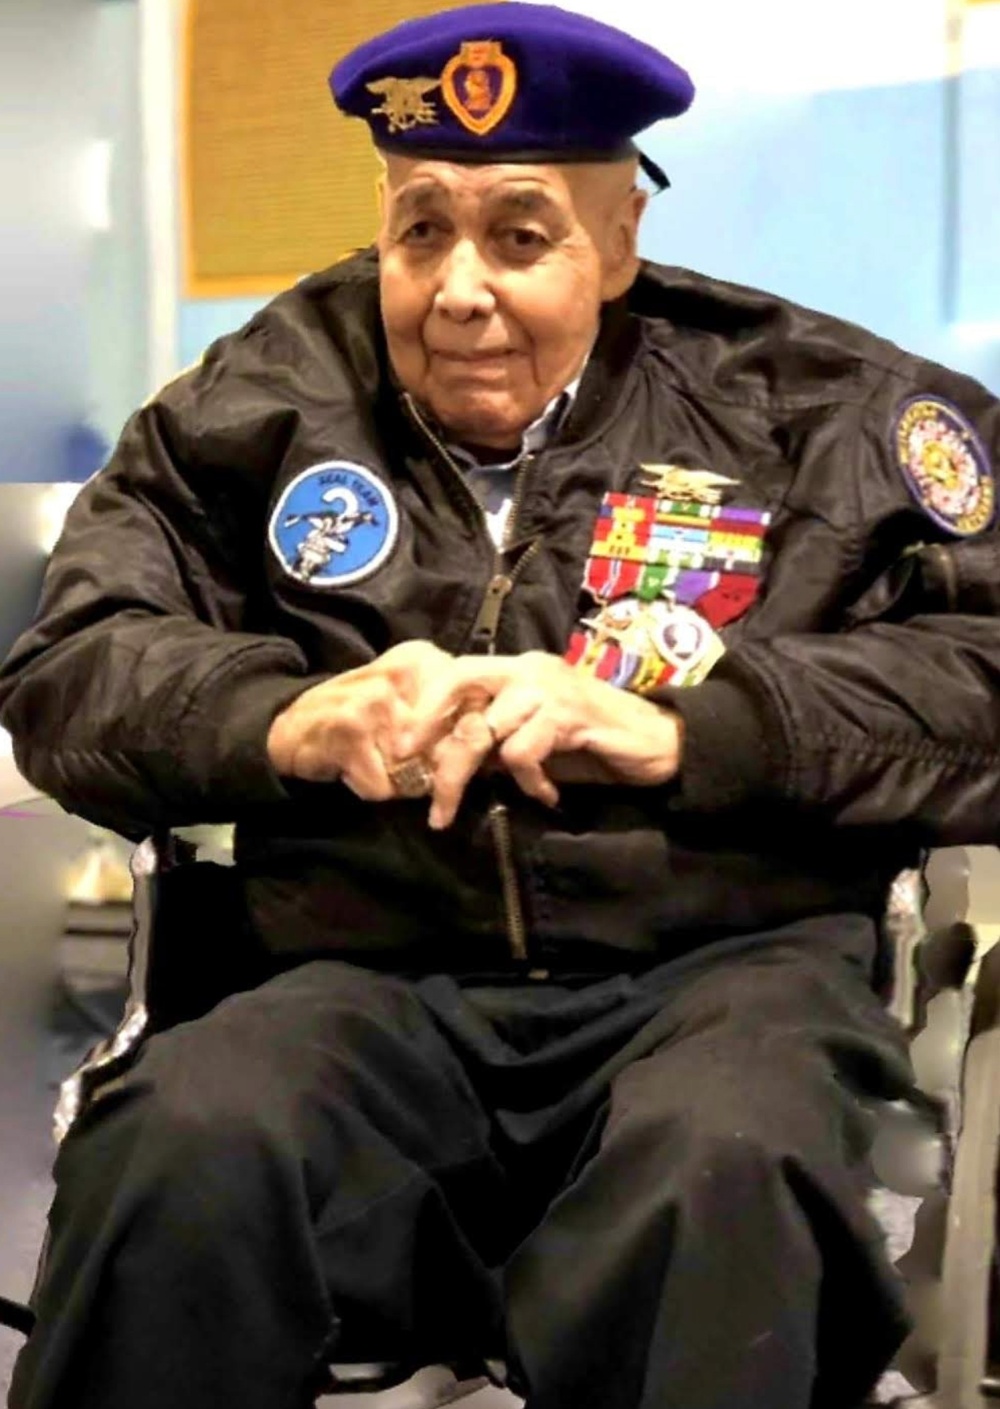 Navy celebrates Sol Atkinson for legacy of service to country, Alaskan veterans, community